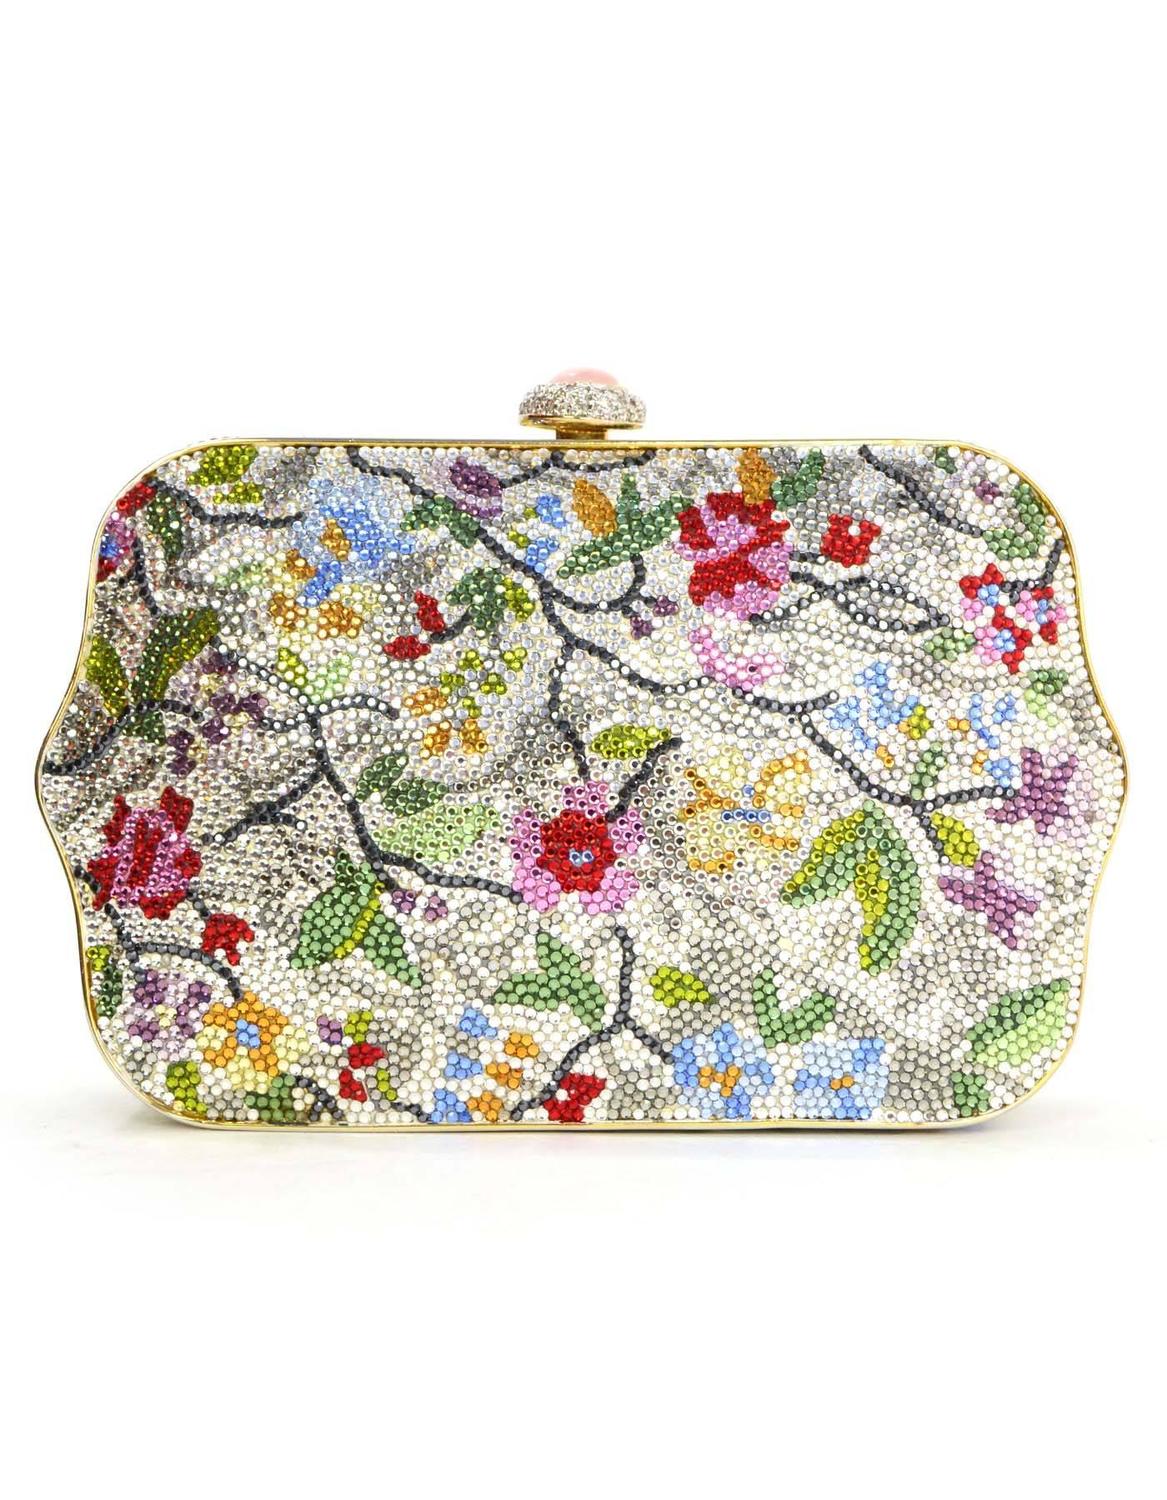 Judith Leiber Multi-Colored Floral Crystal Embellished Minaudiere GHW ...